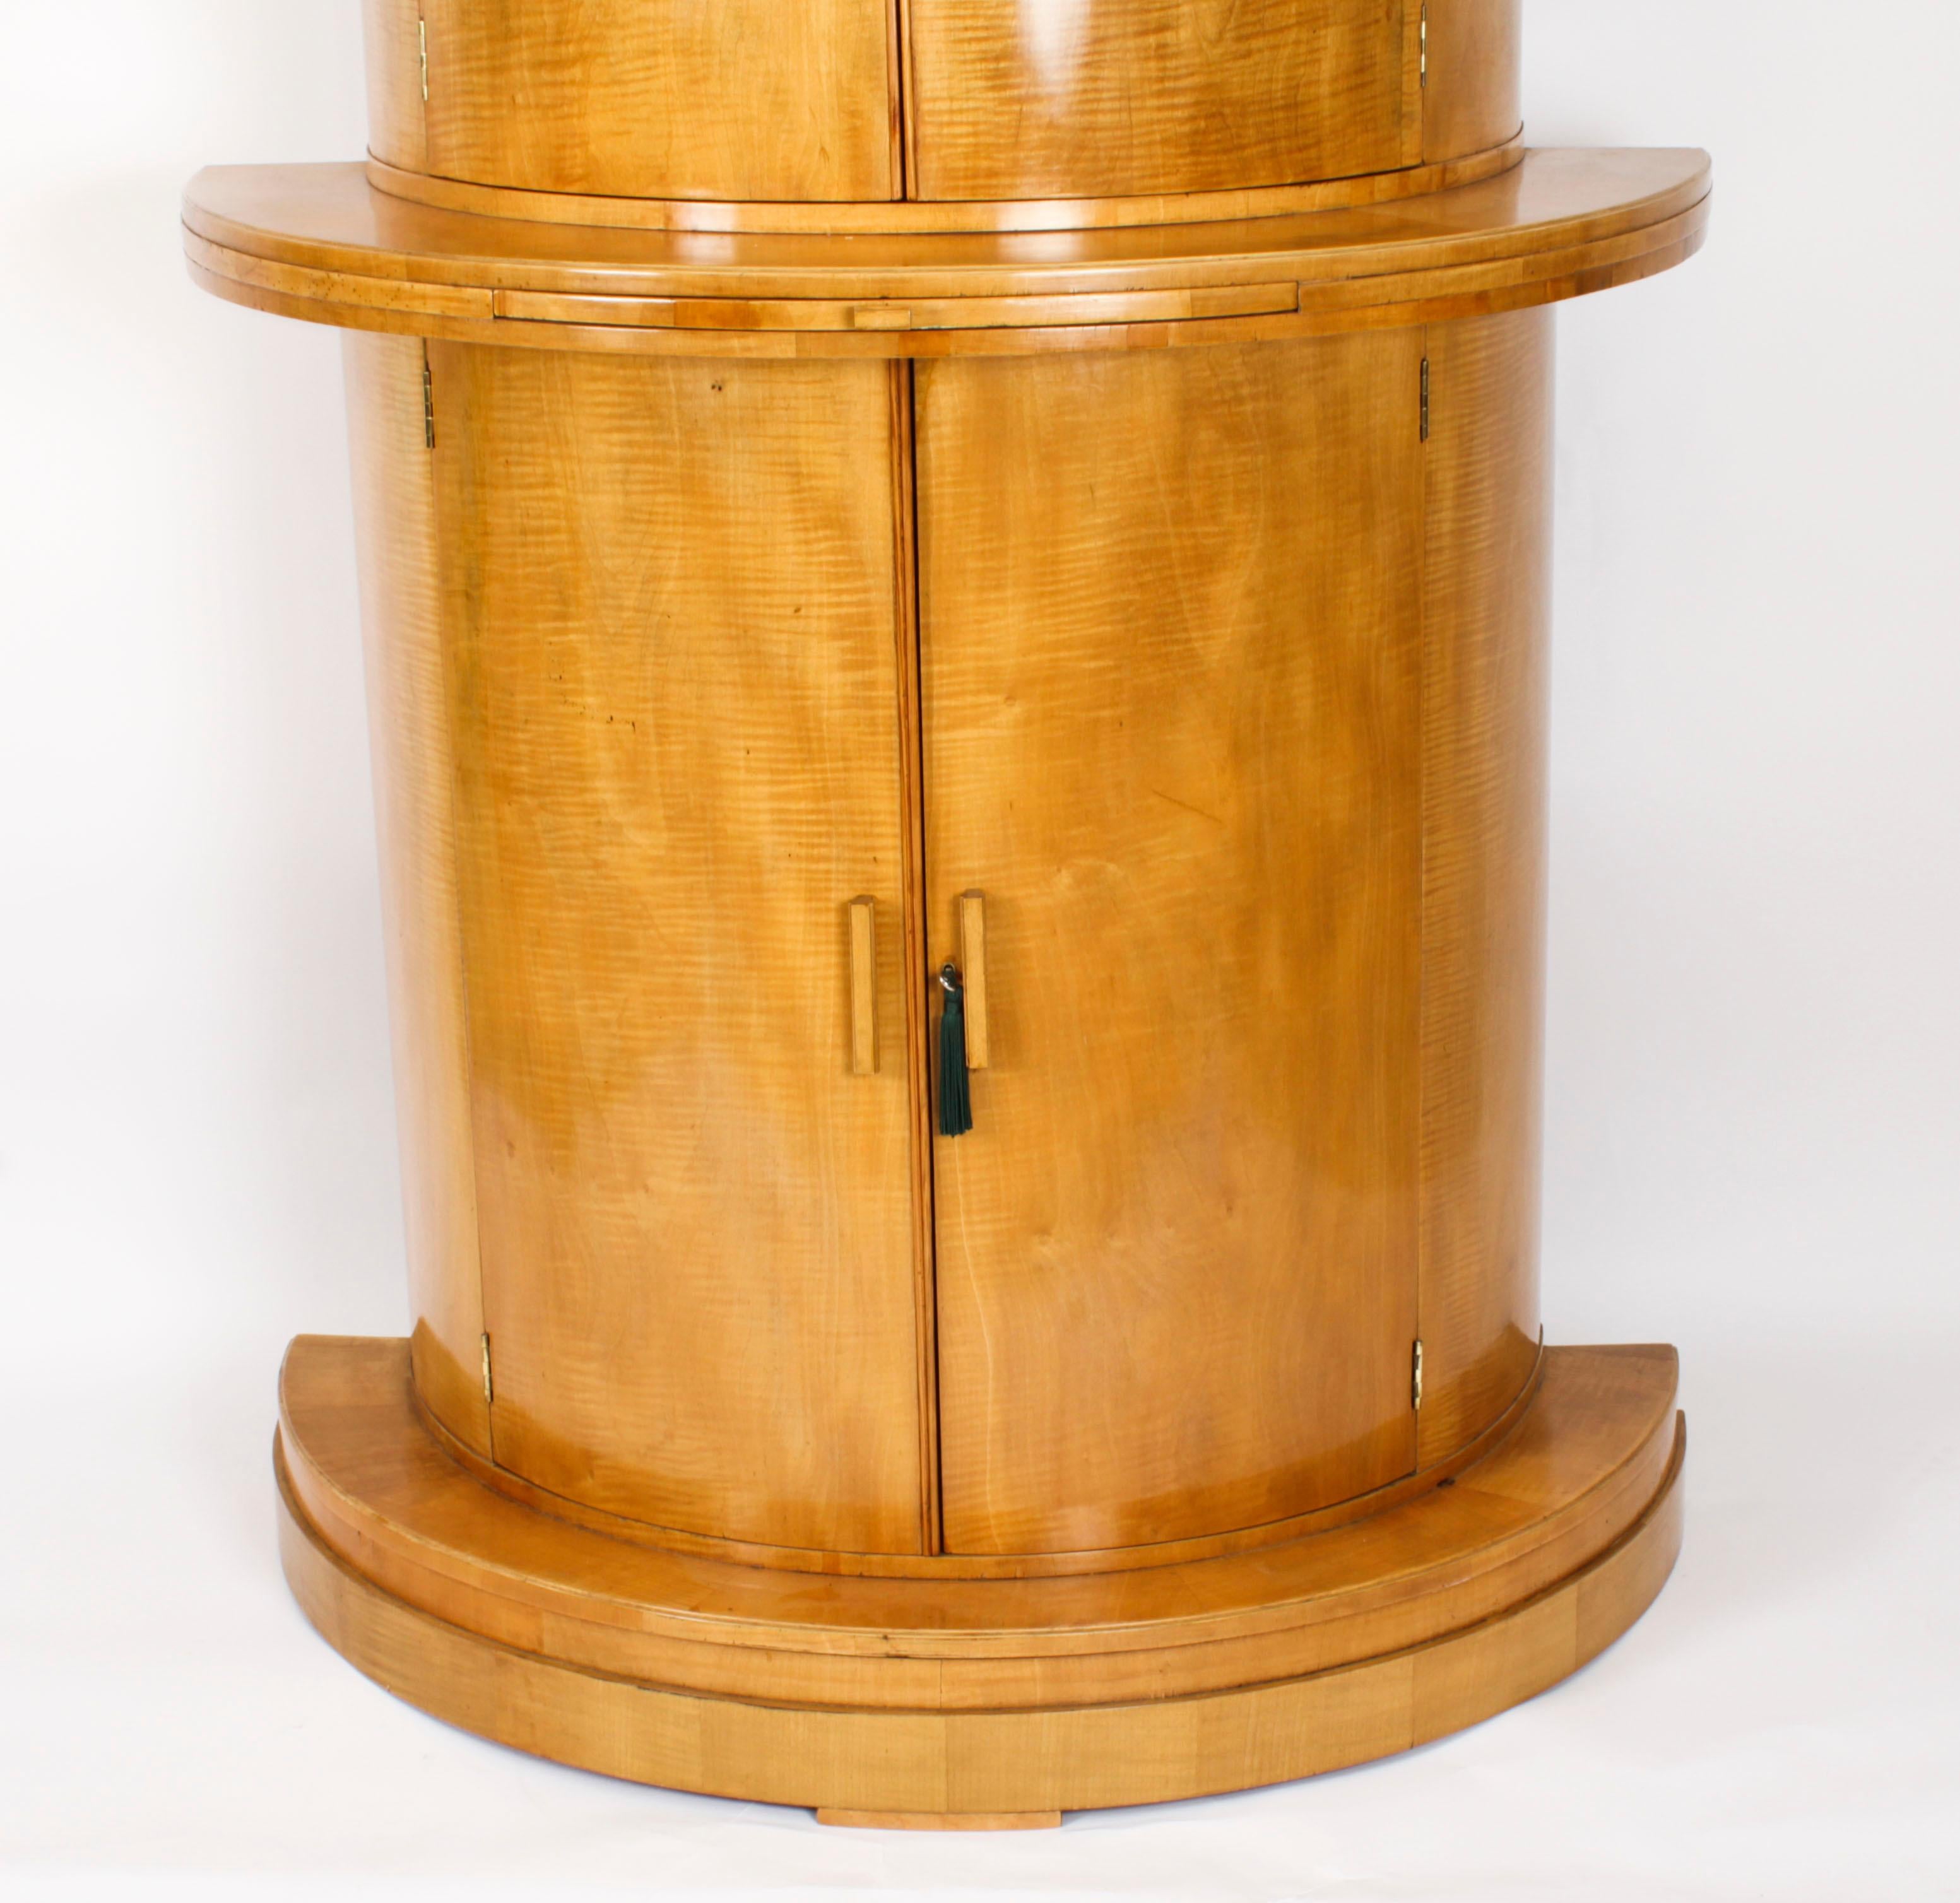 Antique Art Deco Satinwood Cocktail Cabinet by Hille & Glassware 1920s For Sale 7